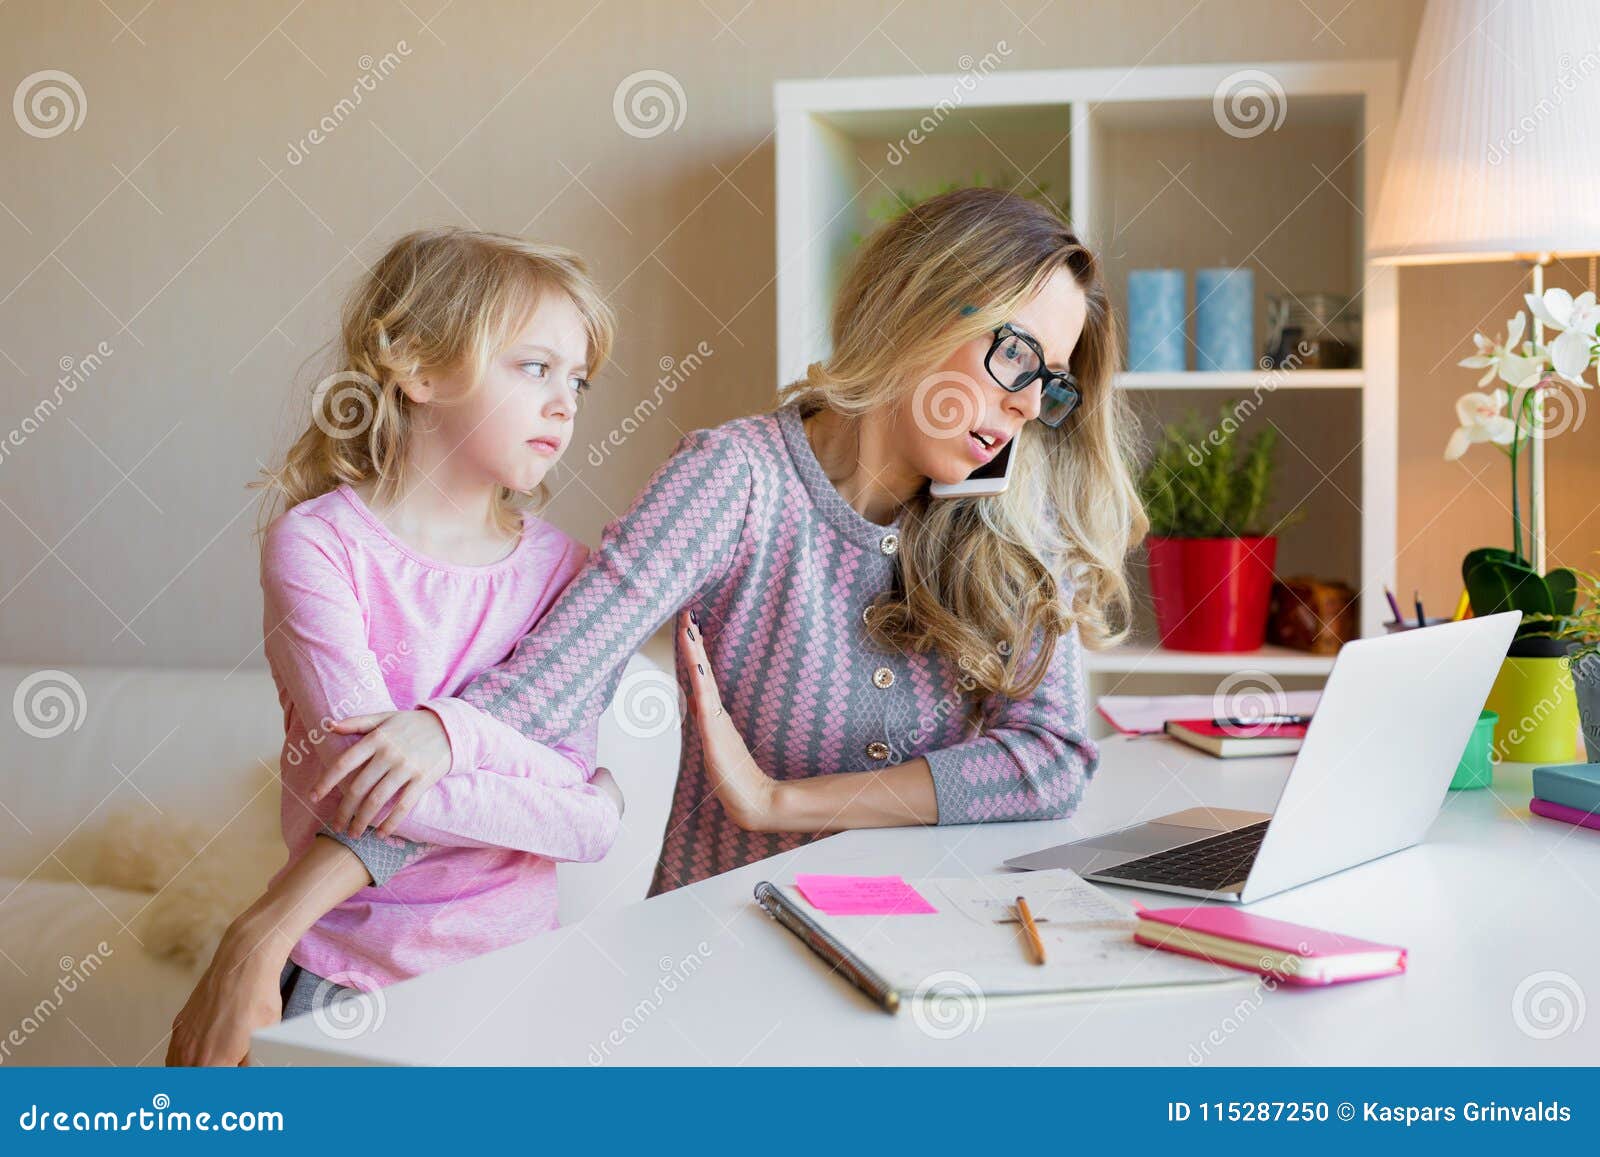 busy working mother doesn`t have time for her kid